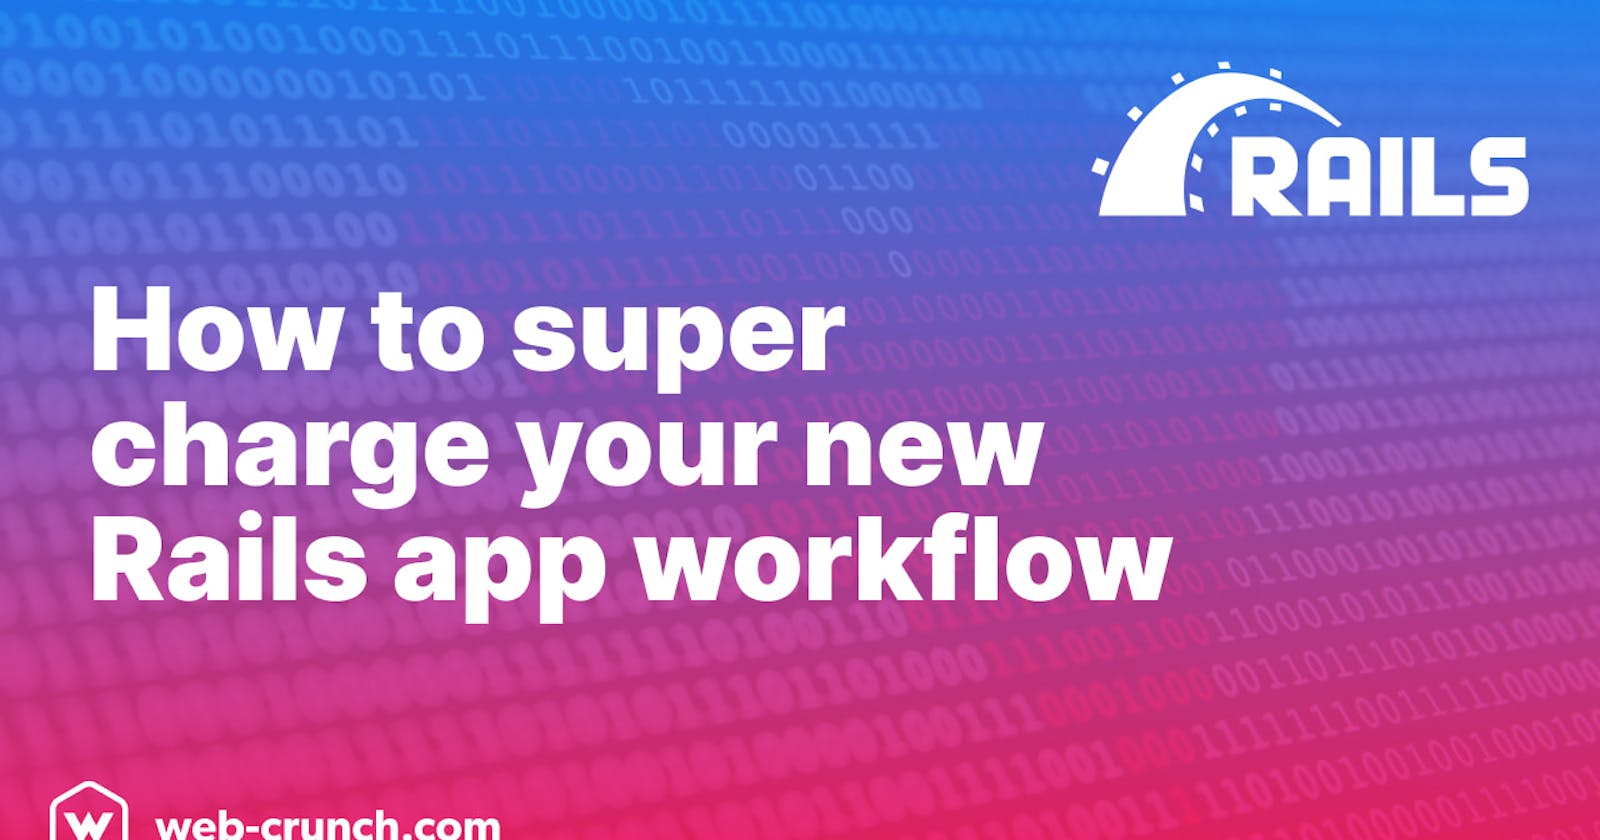 How to super charge your new Rails app workflow